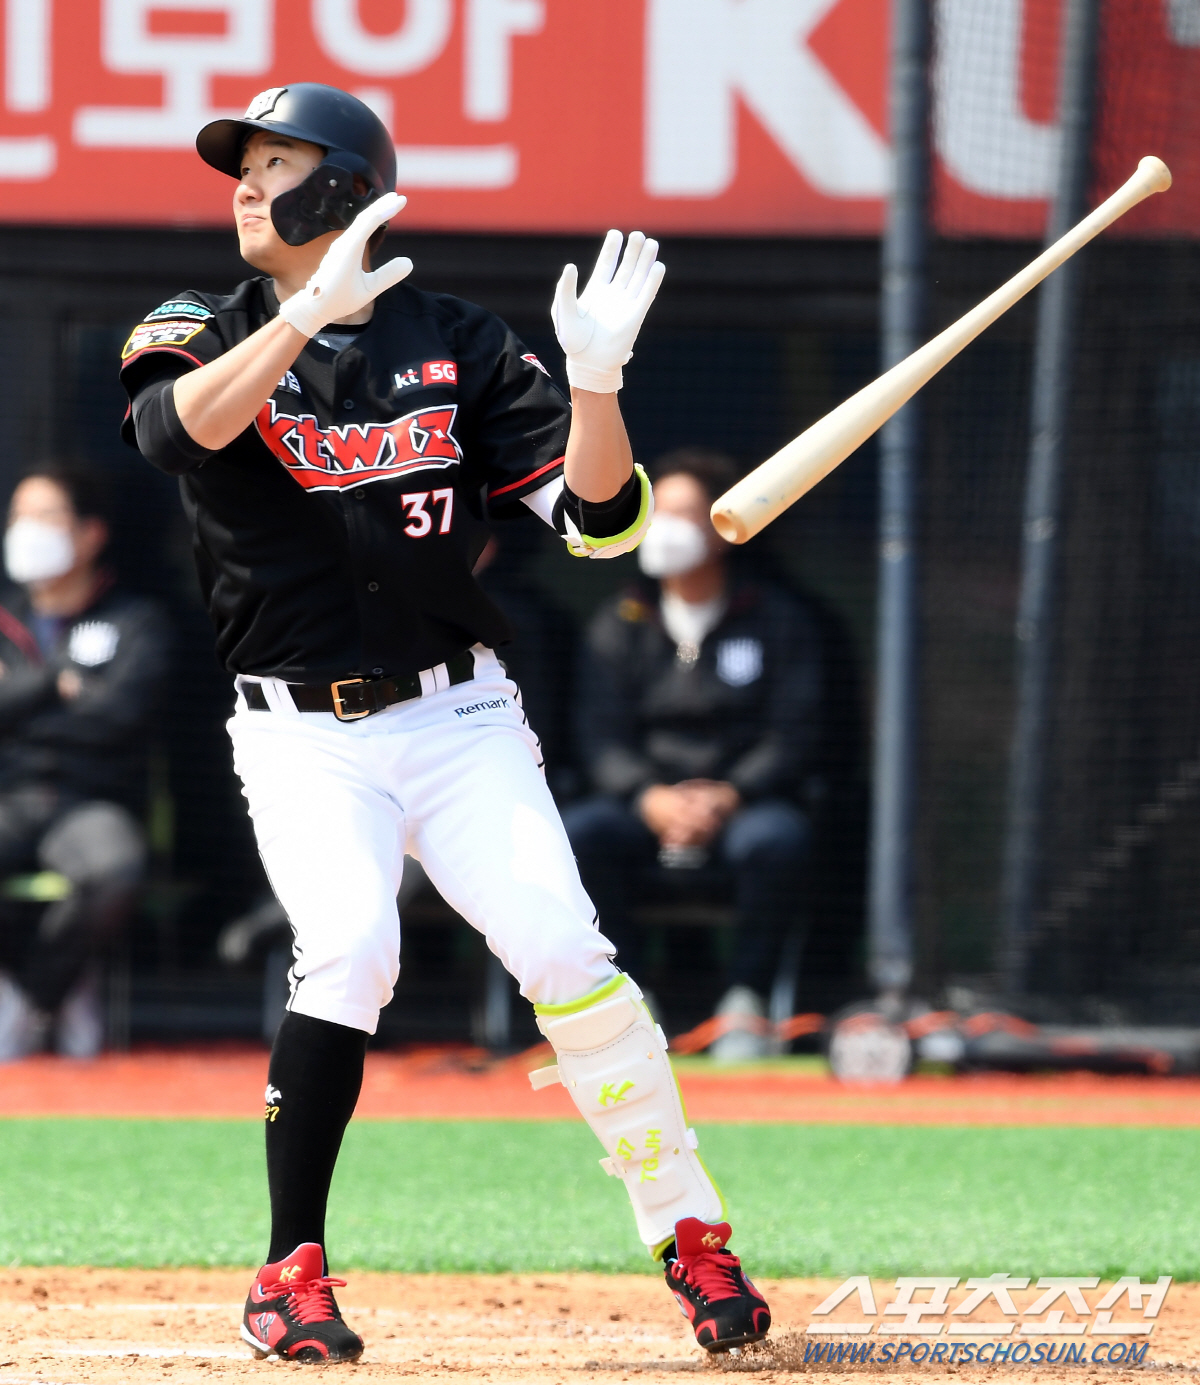 KT Wiz Oh Tae-gon hit a strong three-run homer in the practice against the LG Twins.Oh Tae-gon hit a home run in the Suwon FC Katie Wiz Park on the 22nd, when the team was leading 3-0 in the sixth inning,LG pitcher Lee Min-ho kicked up a 138km slider in the 1B game.Oh Tae-gon, who is competing for first base Weeks ago, succeeded in making a strong impression on KT coach Lee Kang-chul by shooting a home run in the first inning after the Kyonggi mid-season replacement.As of the end of the sixth, KT is ahead of LG 6-0.